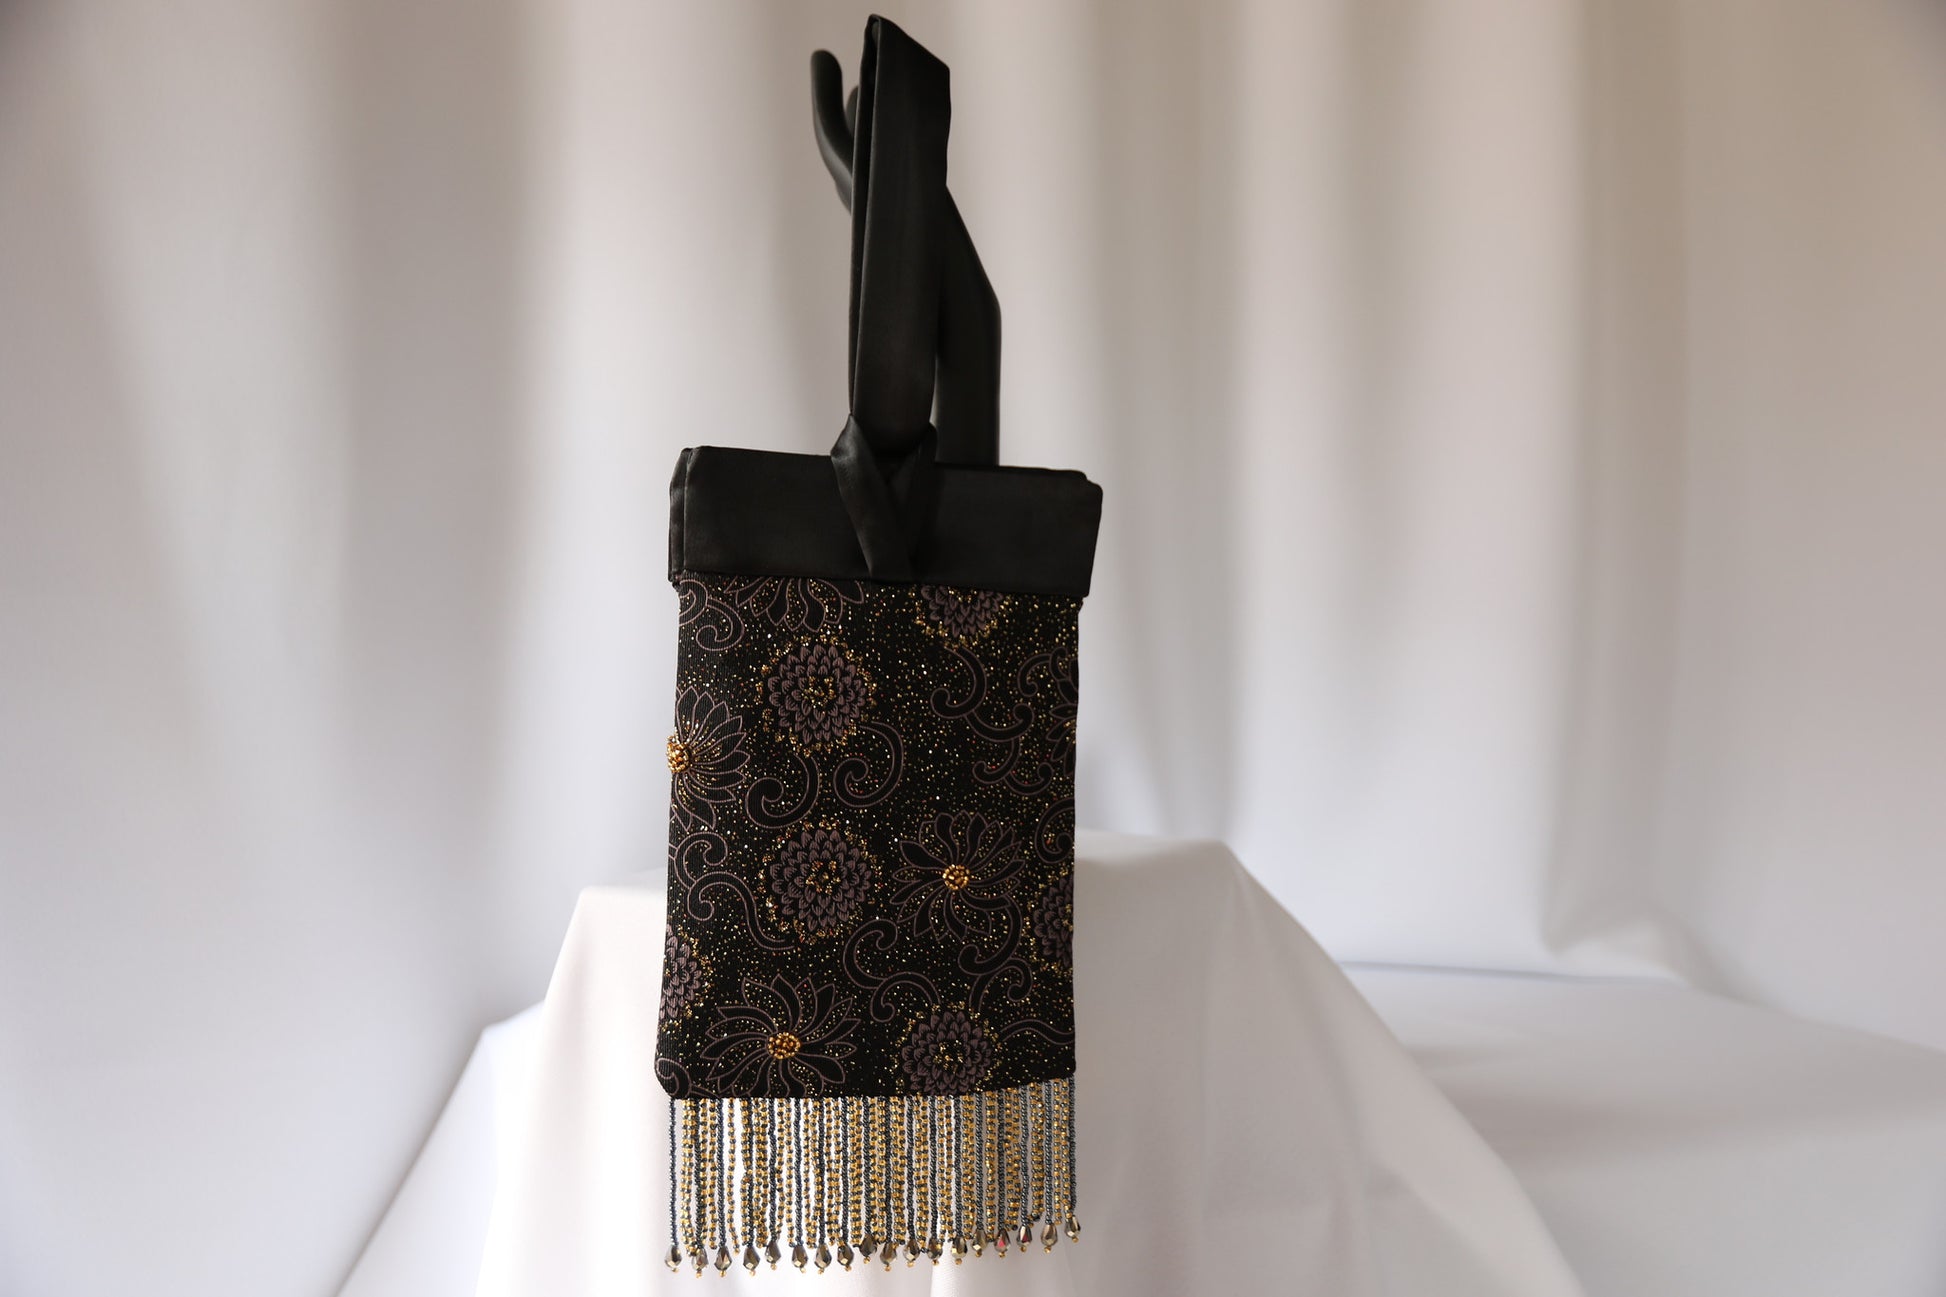 Black and Gold Evening Bag from Jenny Jag-Wear Design. This is a compact and functional ladies evening bag made from gold, grey and black knit, black satin trim and handle, and handcrafted beaded fringe. The oversized looped handle allows the user to pass the loop through her wrist, and keep hands free. Ideal wristlet design and very elegant. The Zara Collection from Jenny Jag-Wear Design.